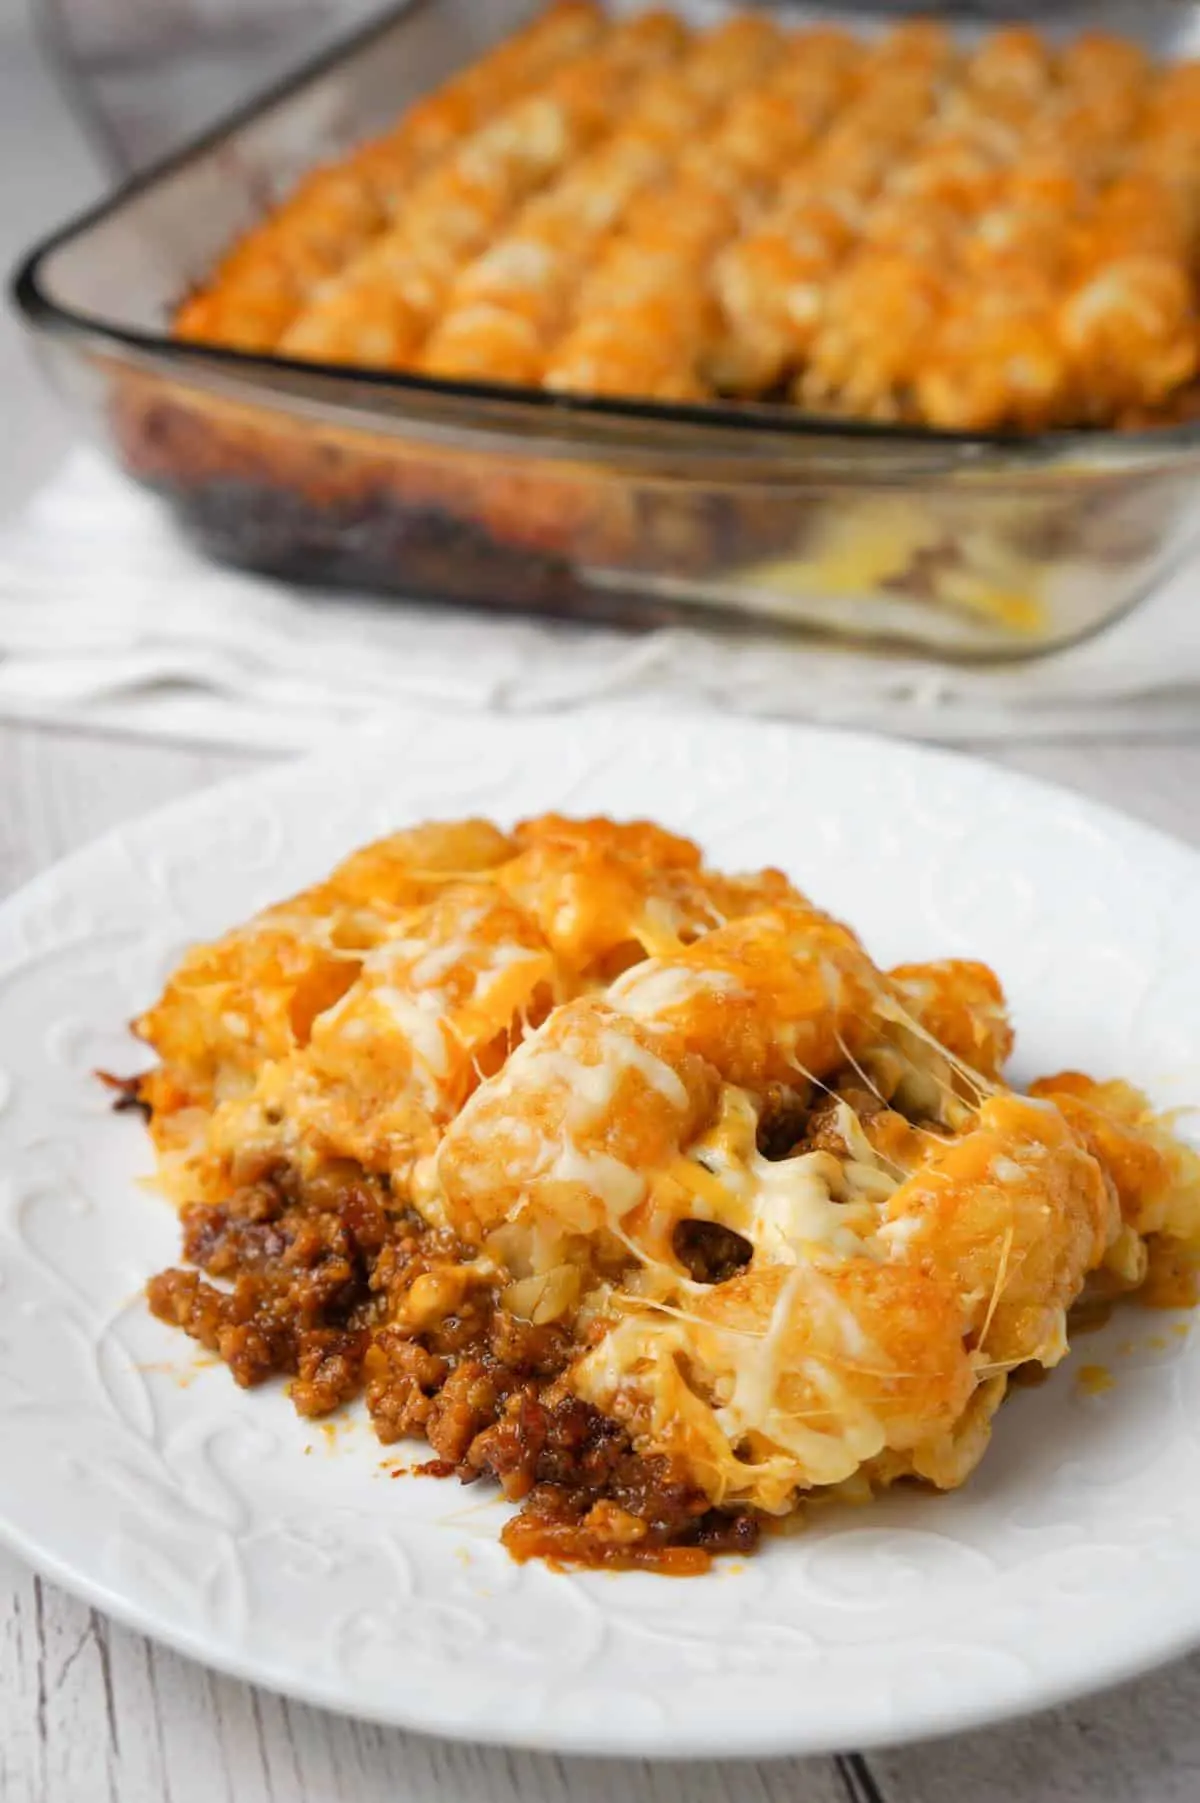 Dr Pepper Pork Tater Tot Casserole is a hearty dish with a base of ground pork cooked in Dr Pepper and BBQ sauce and topped with tater tops and shredded cheese.